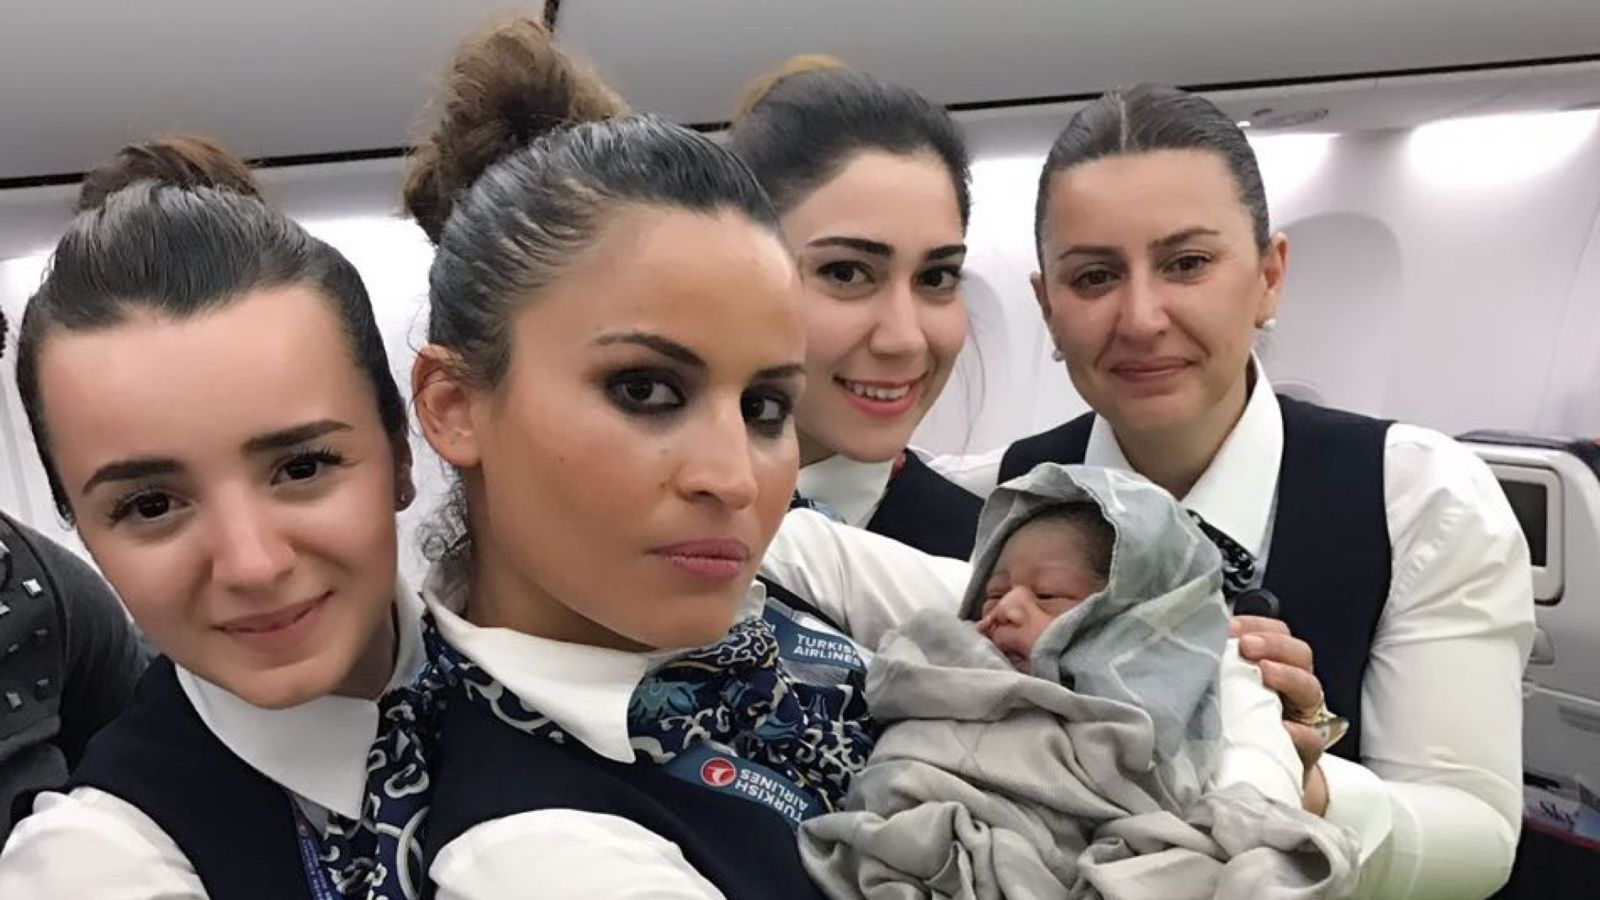 Turkish Airlines cabin crew deliver premature baby mid-flight at 42,000ft